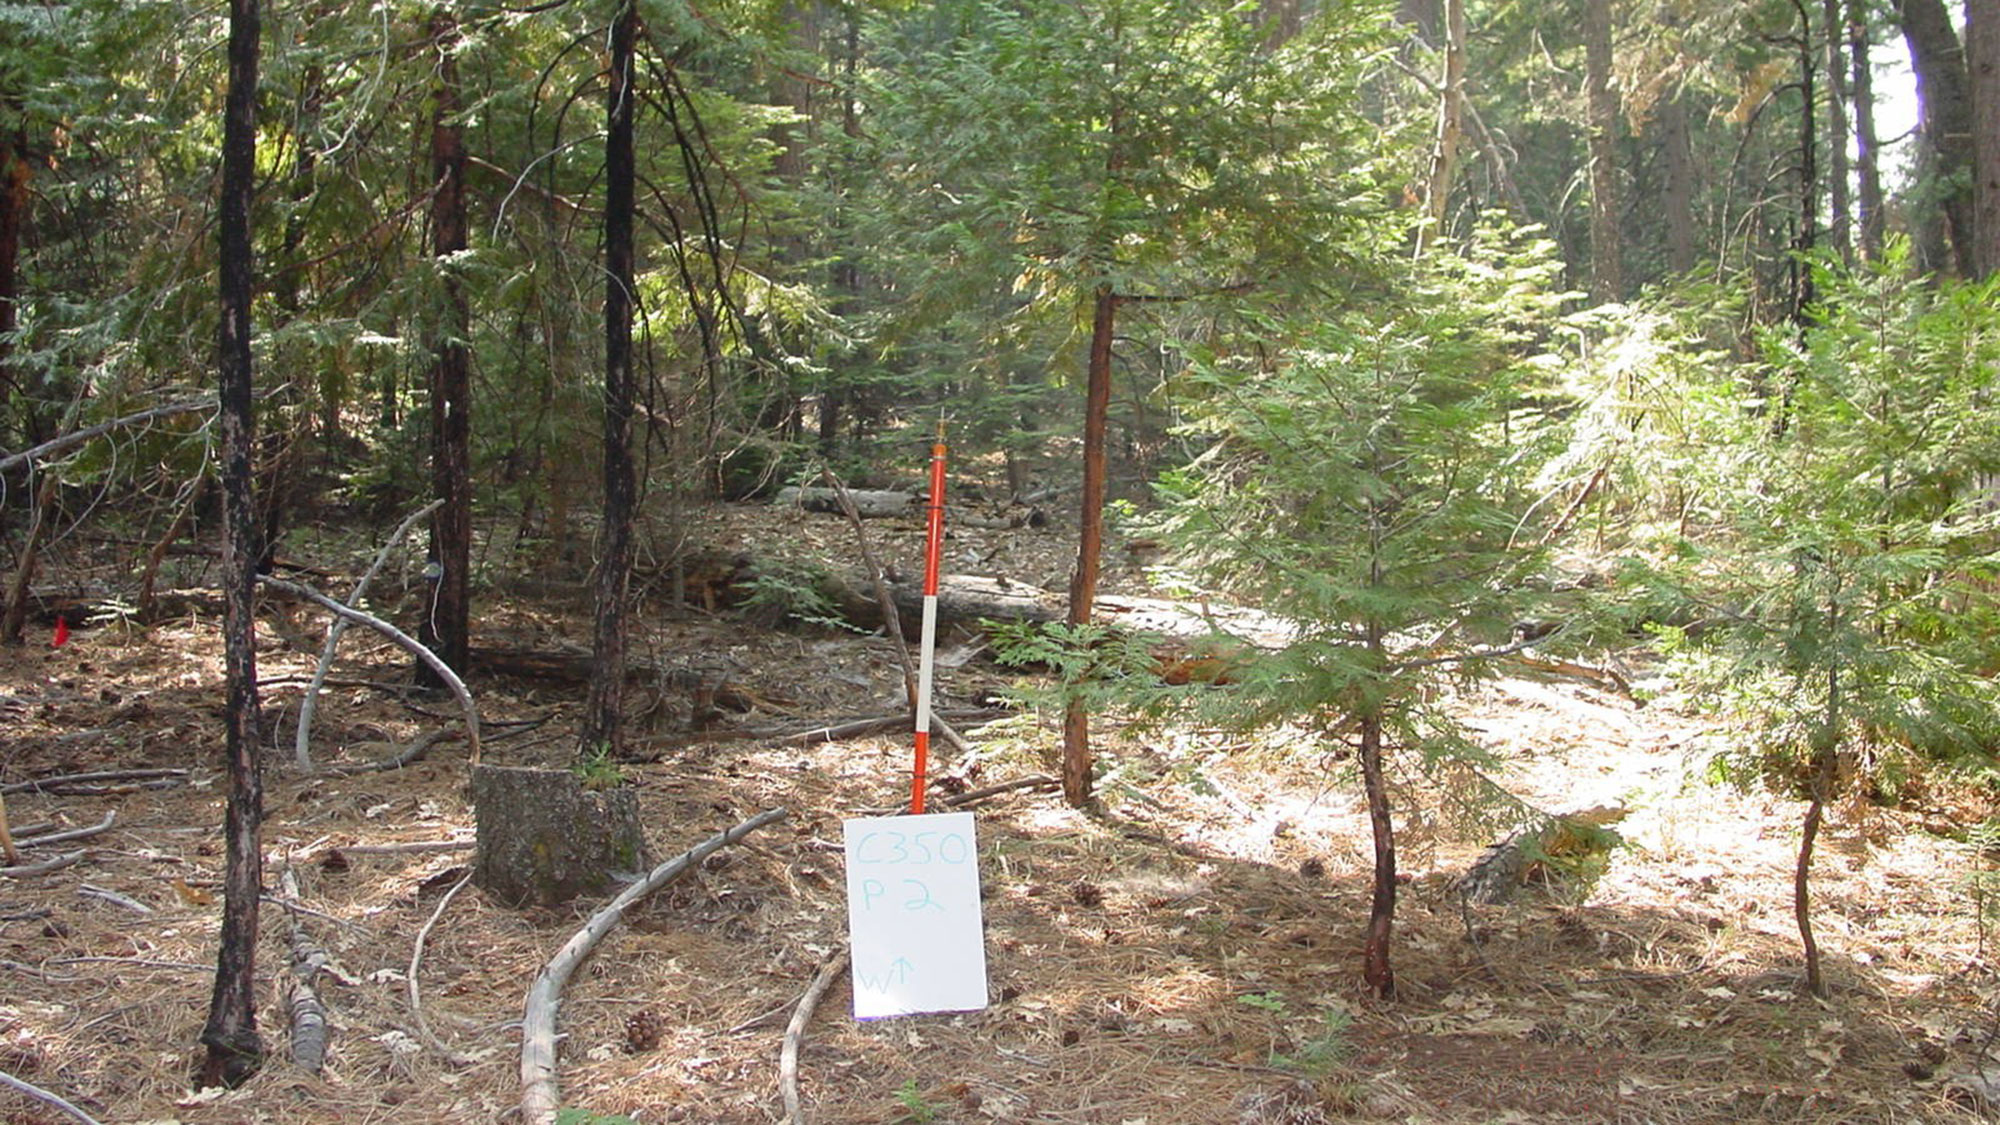 A photo of a section of a conifer forest. The forest floor is covered in dead sticks and debris, and small trees and vegetation are blocking the view.